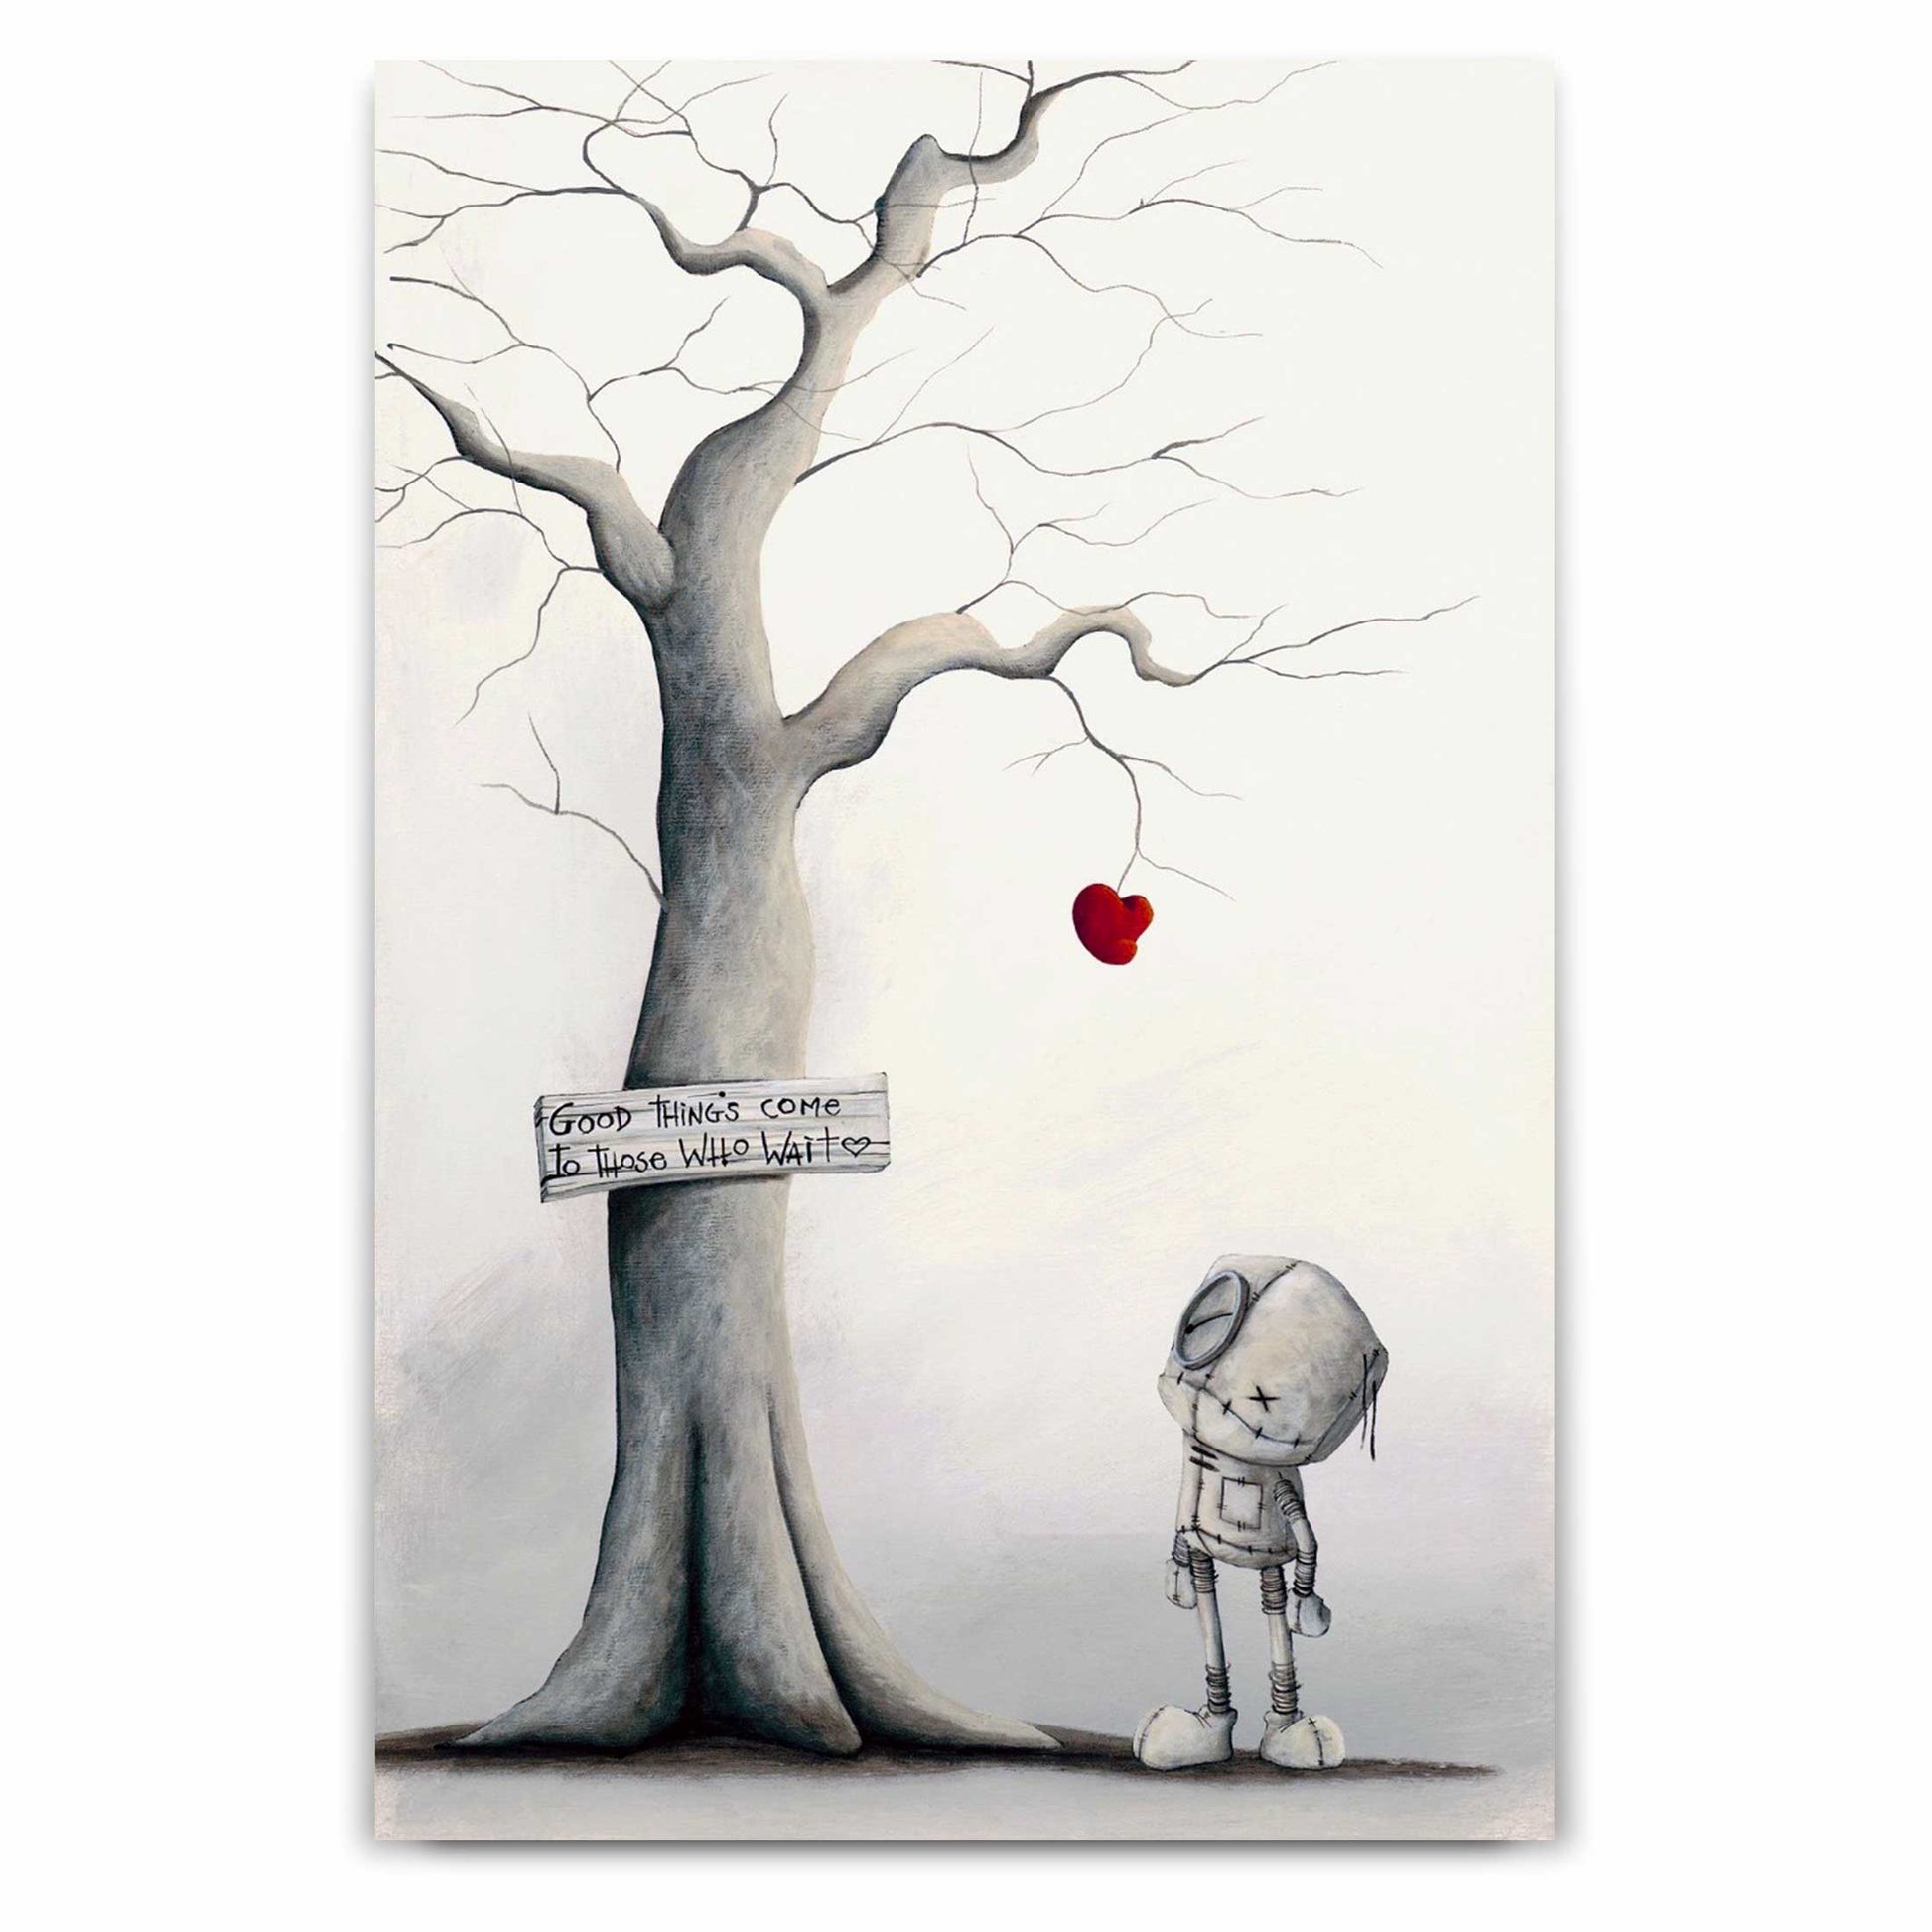 Fabio Napoleoni "Good Things Come to Those Who Wait" Limited Edition Canvas Giclee